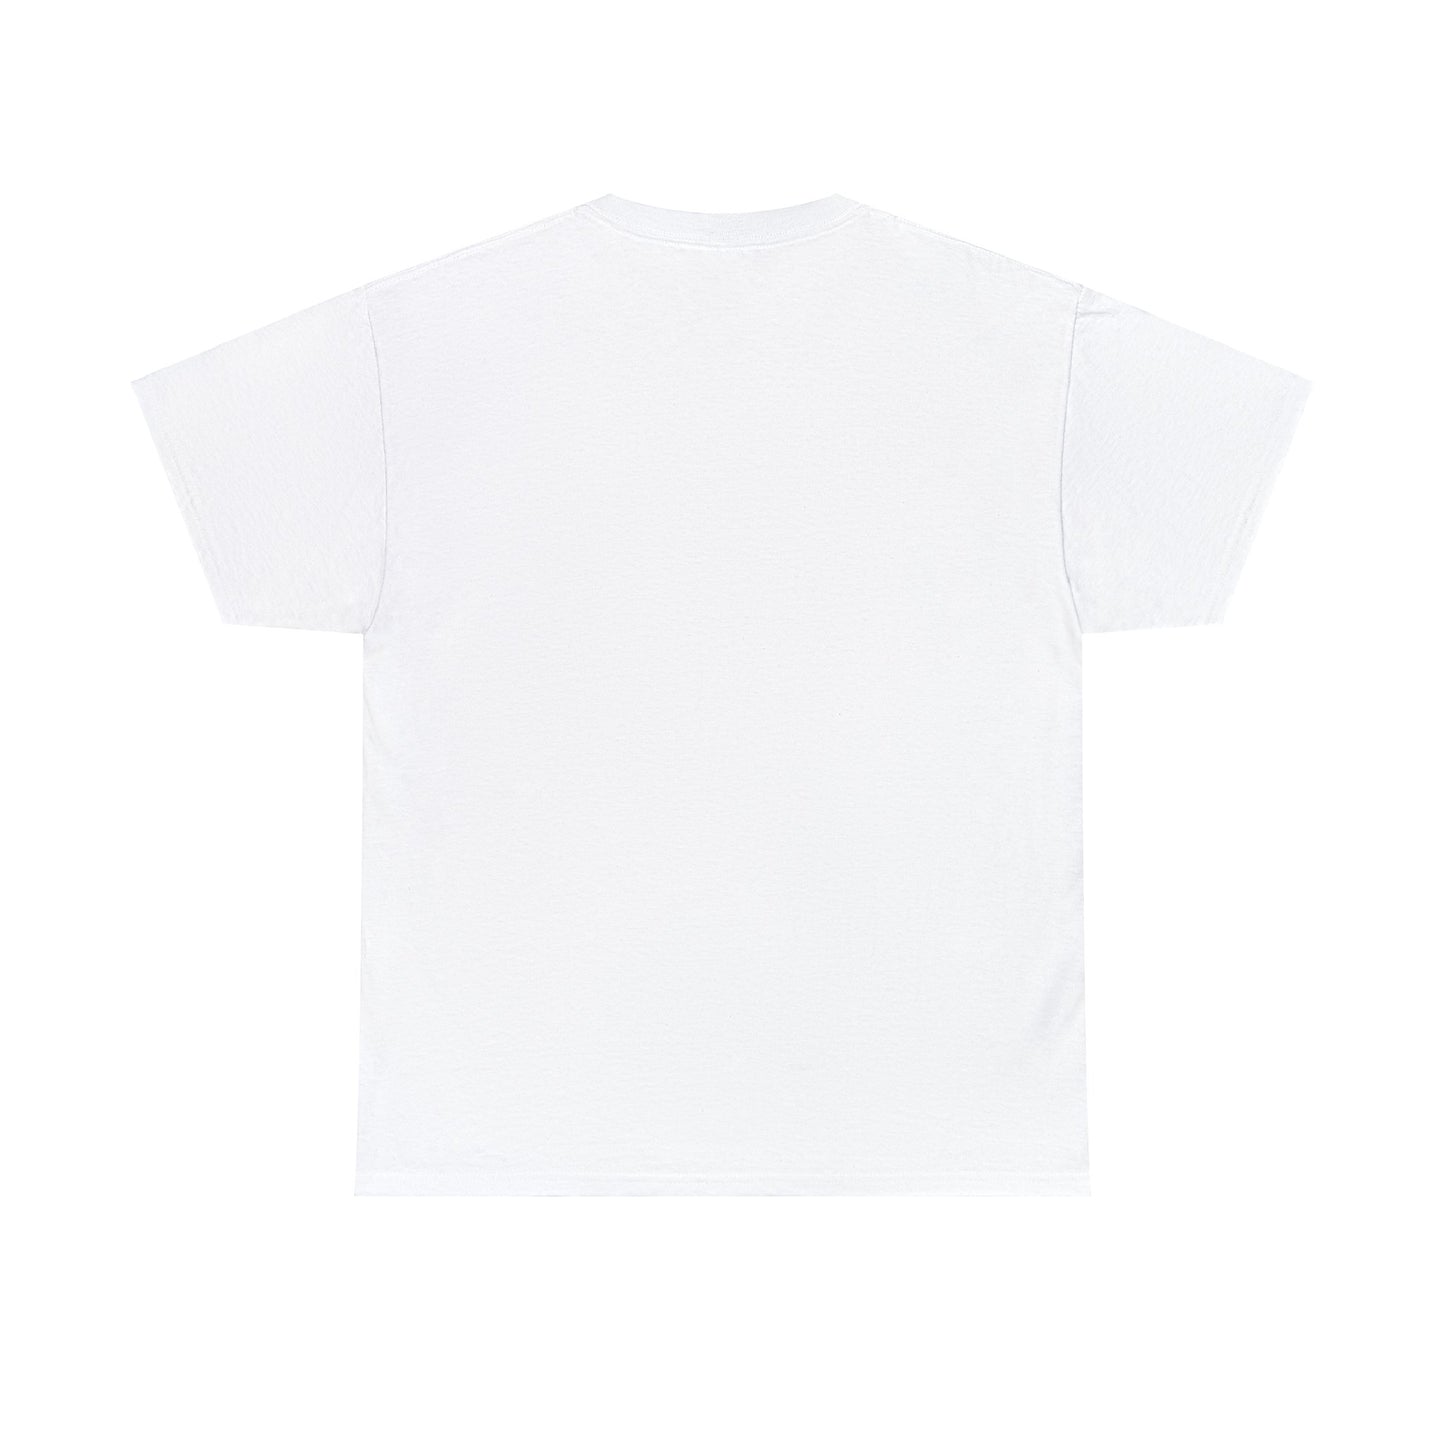 T4x That's All Folks Unisex Heavy Cotton Tee